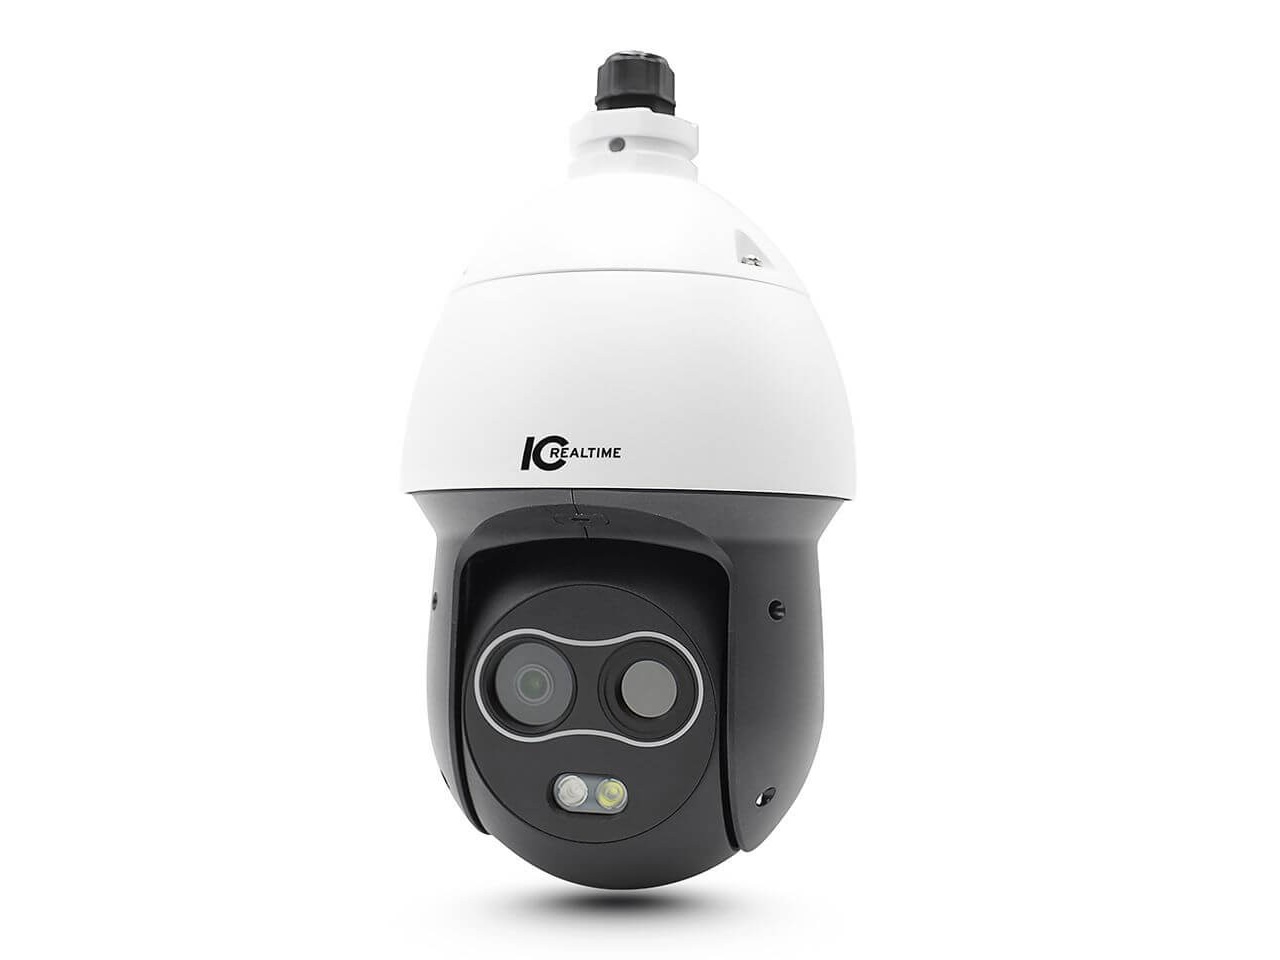 THIP-P4078FM-IR 256x192 Thermal/4MP Visible Hybrid Pan  Tilt Camera by ICRealtime